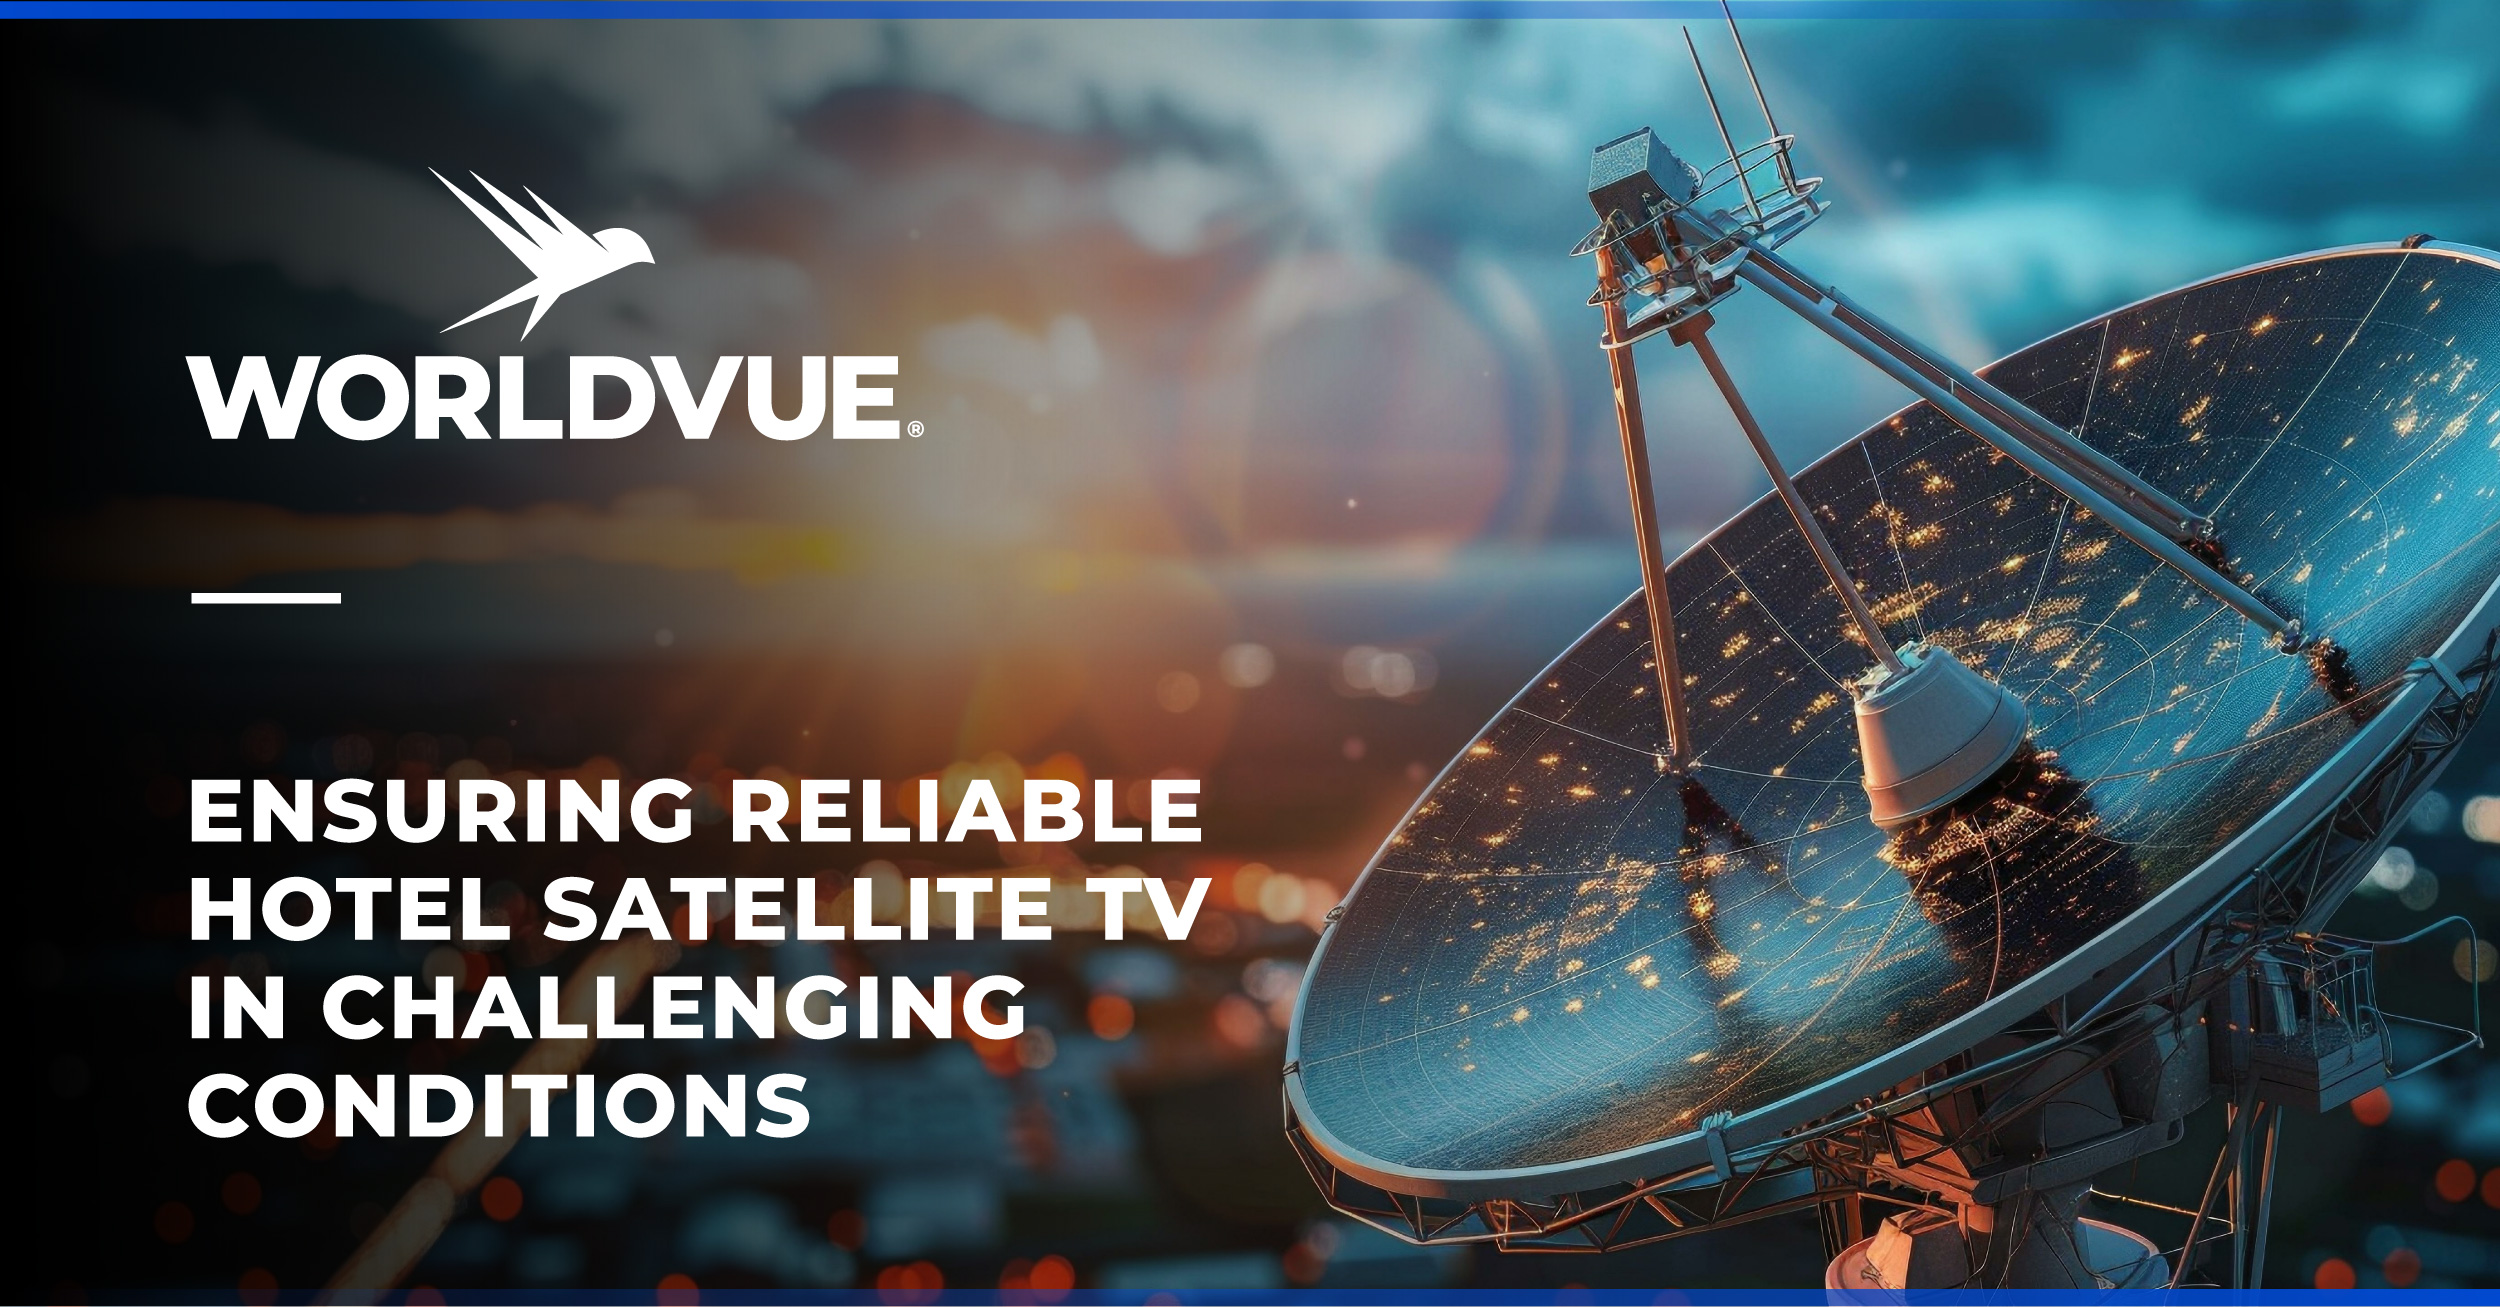 photo of satellite dish with WorldVue logo and text saying "Ensuring Reliable Hotel Satellite TV in Challenging Conditions"